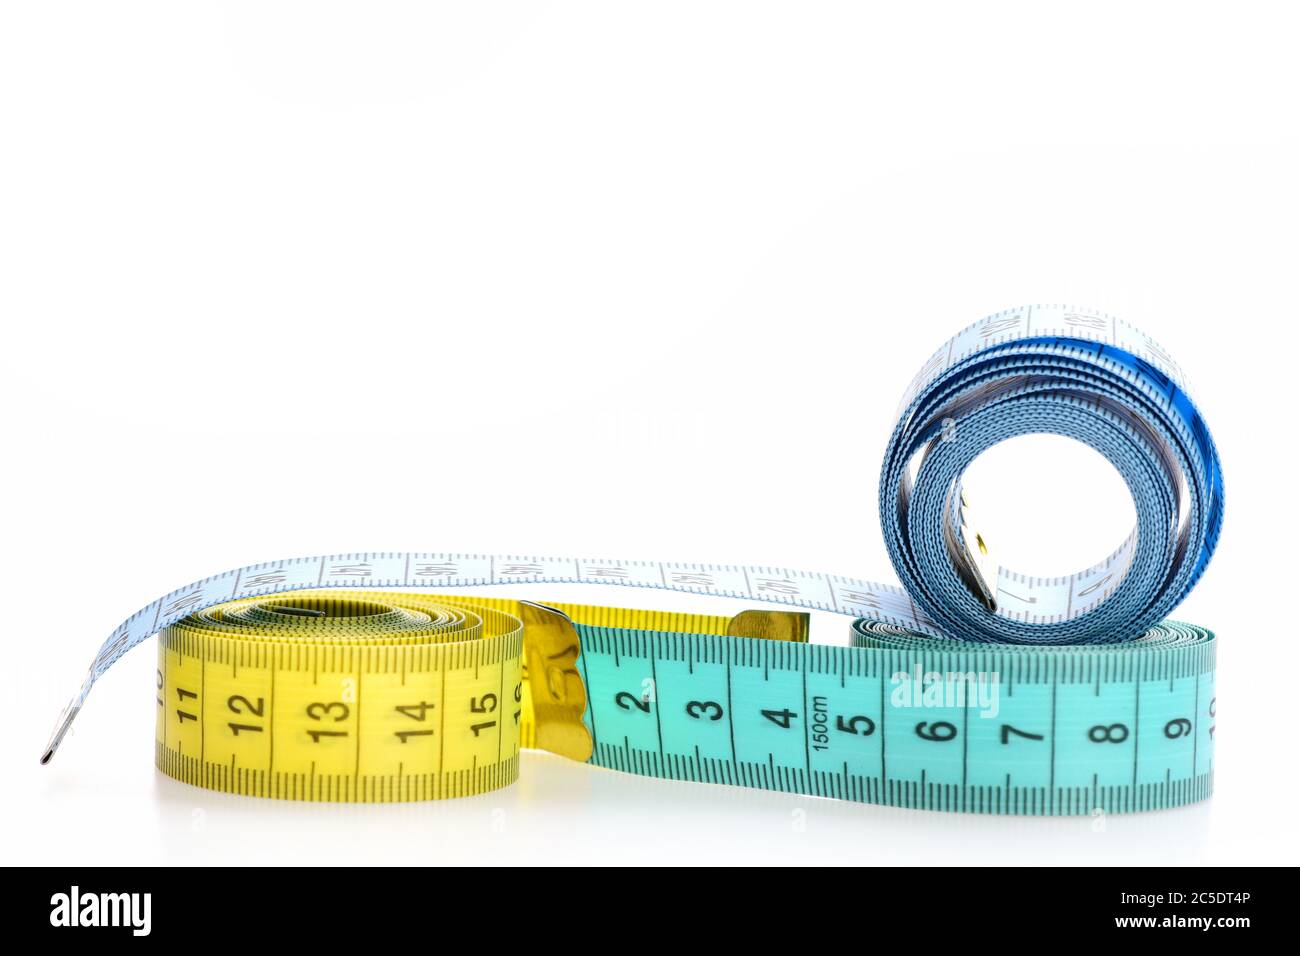 https://c8.alamy.com/comp/2C5DT4P/yellow-and-blue-rolled-measuring-tapes-isolated-on-white-background-rolled-centimeter-rulers-measuring-tapes-of-tailor-with-indicators-in-form-of-centimeters-handicraft-and-tailoring-concept-2C5DT4P.jpg